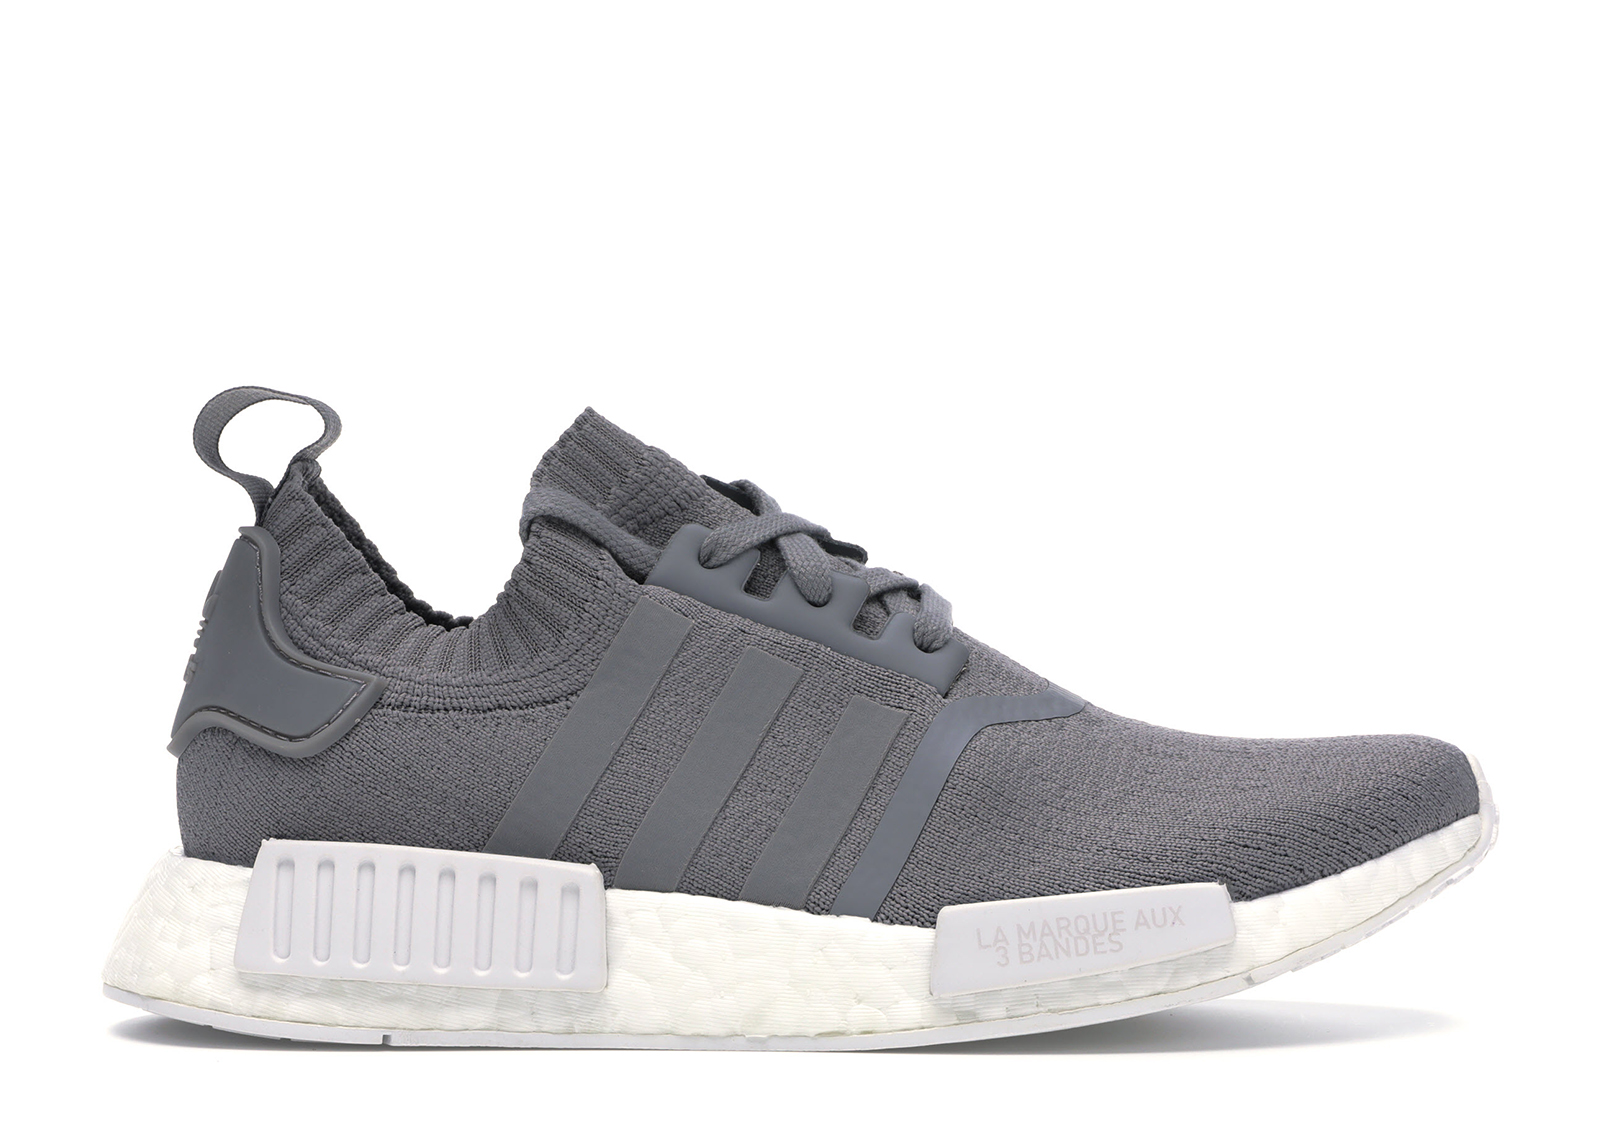 adidas nmd vapour grey for sale